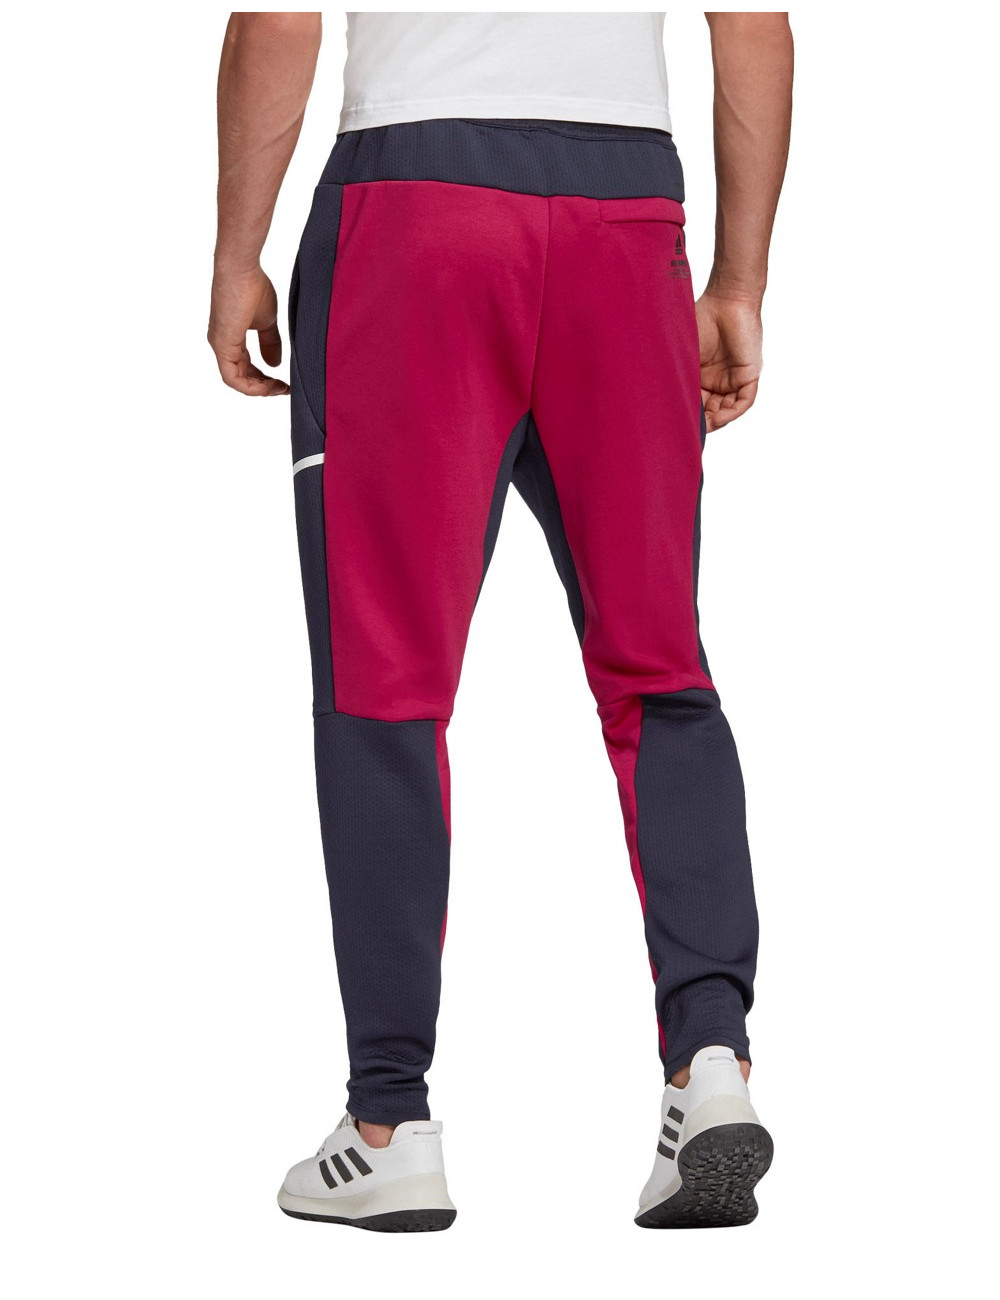 adidas Zne joggers in navy